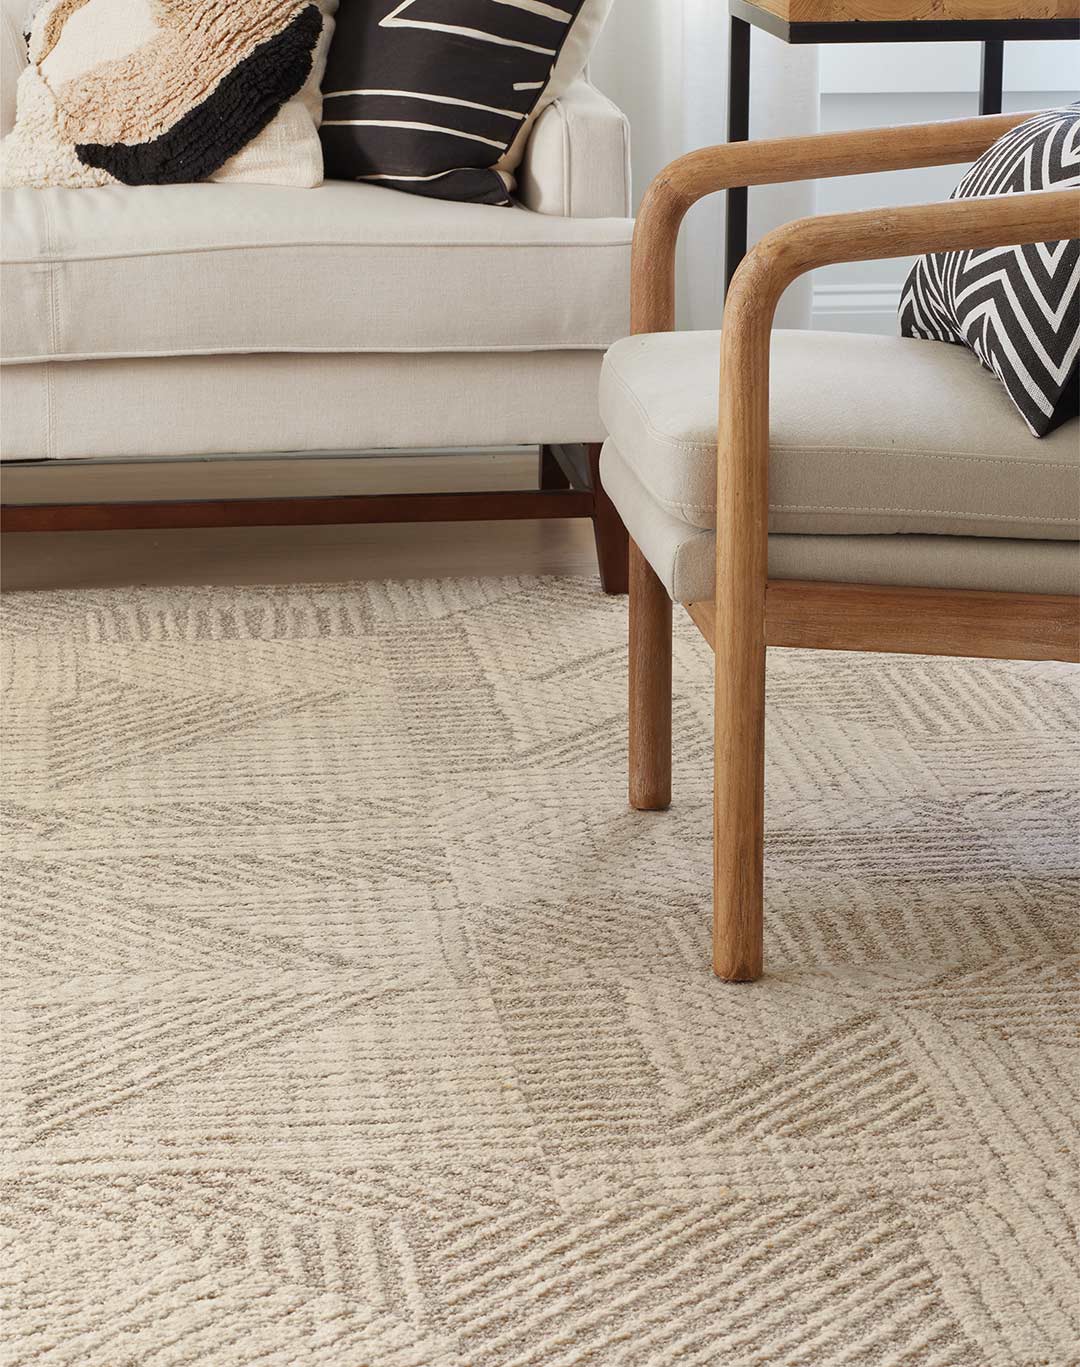 Modular Rug with Hard Lines in a Natural Beige from Flor